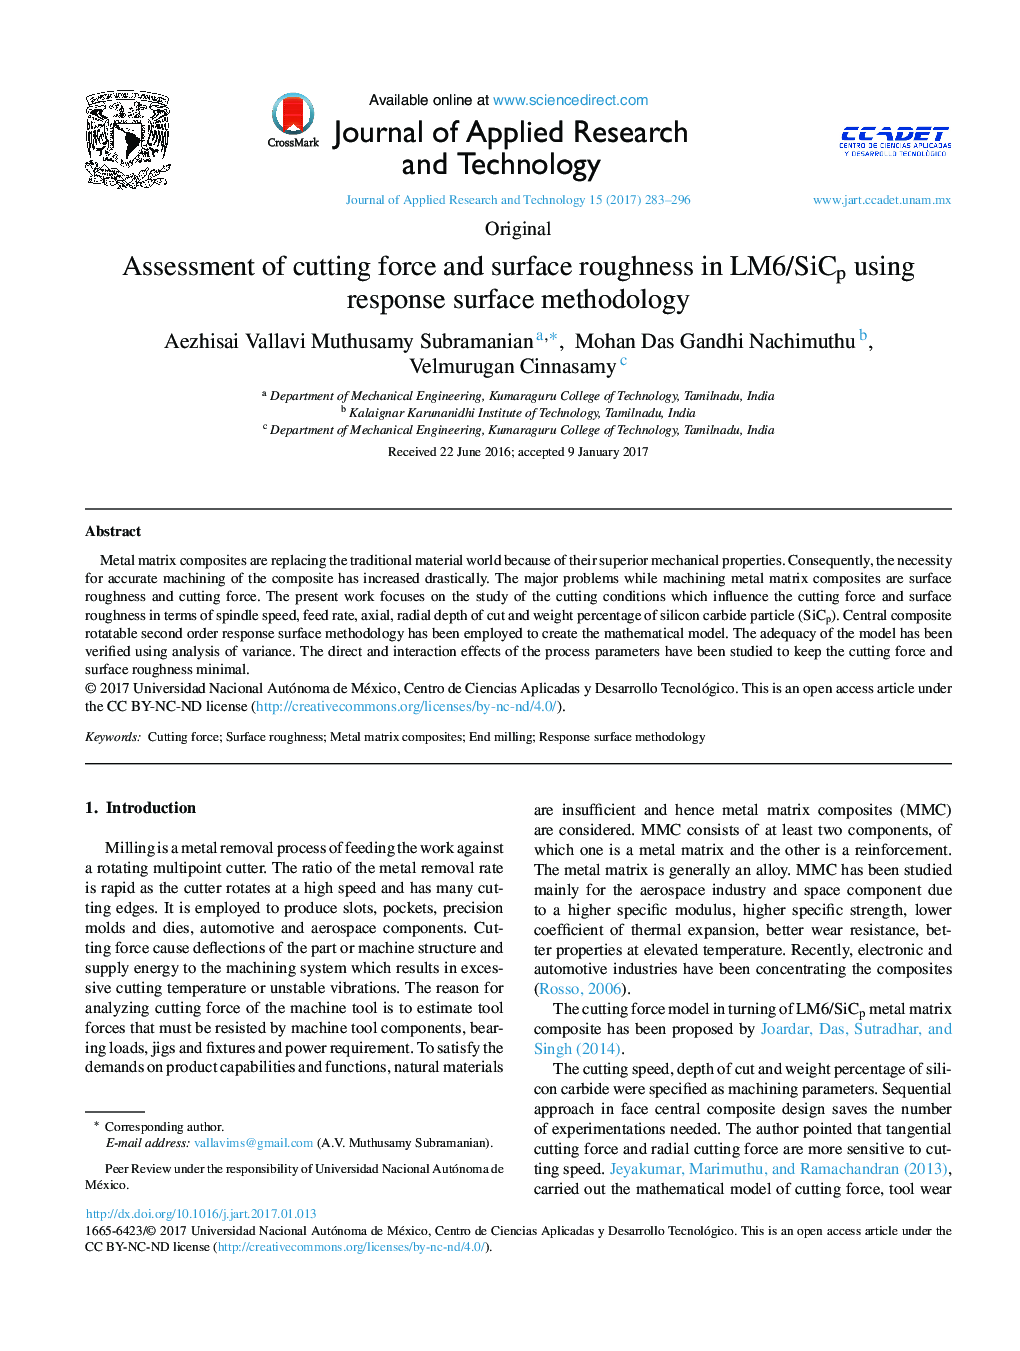 Assessment of cutting force and surface roughness in LM6/SiCp using response surface methodology